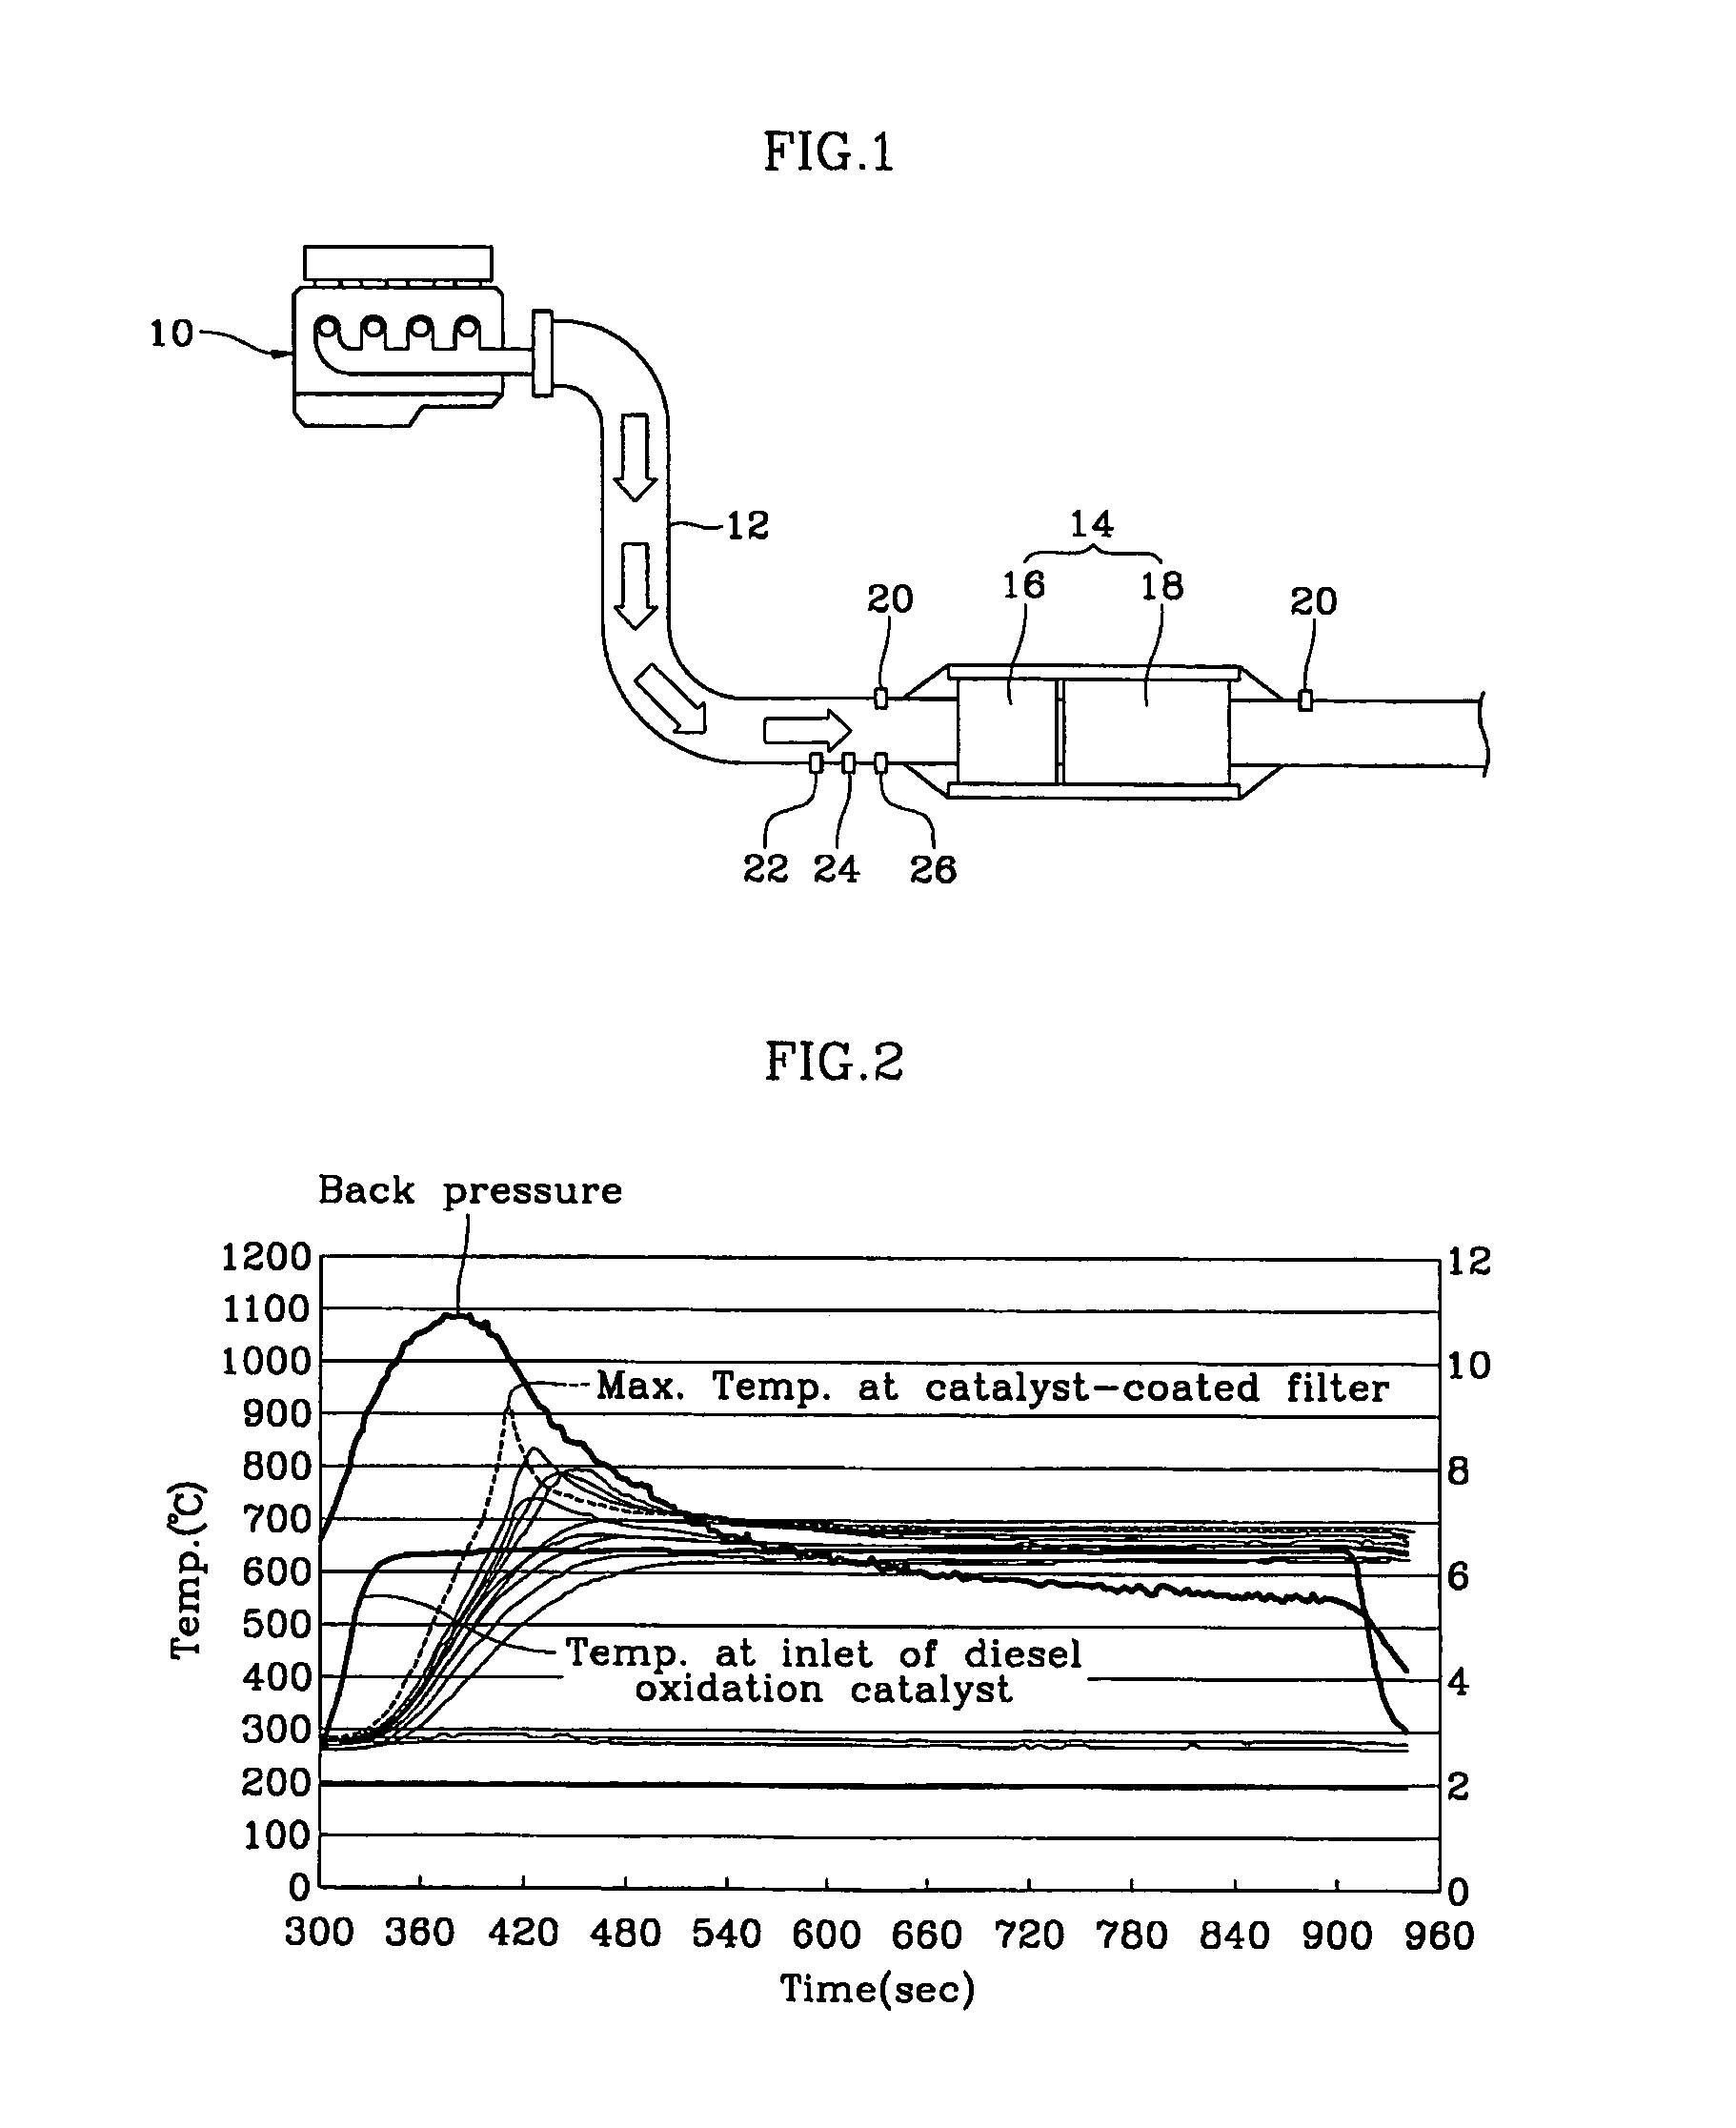 Method for aging catalyzed particulate filter system